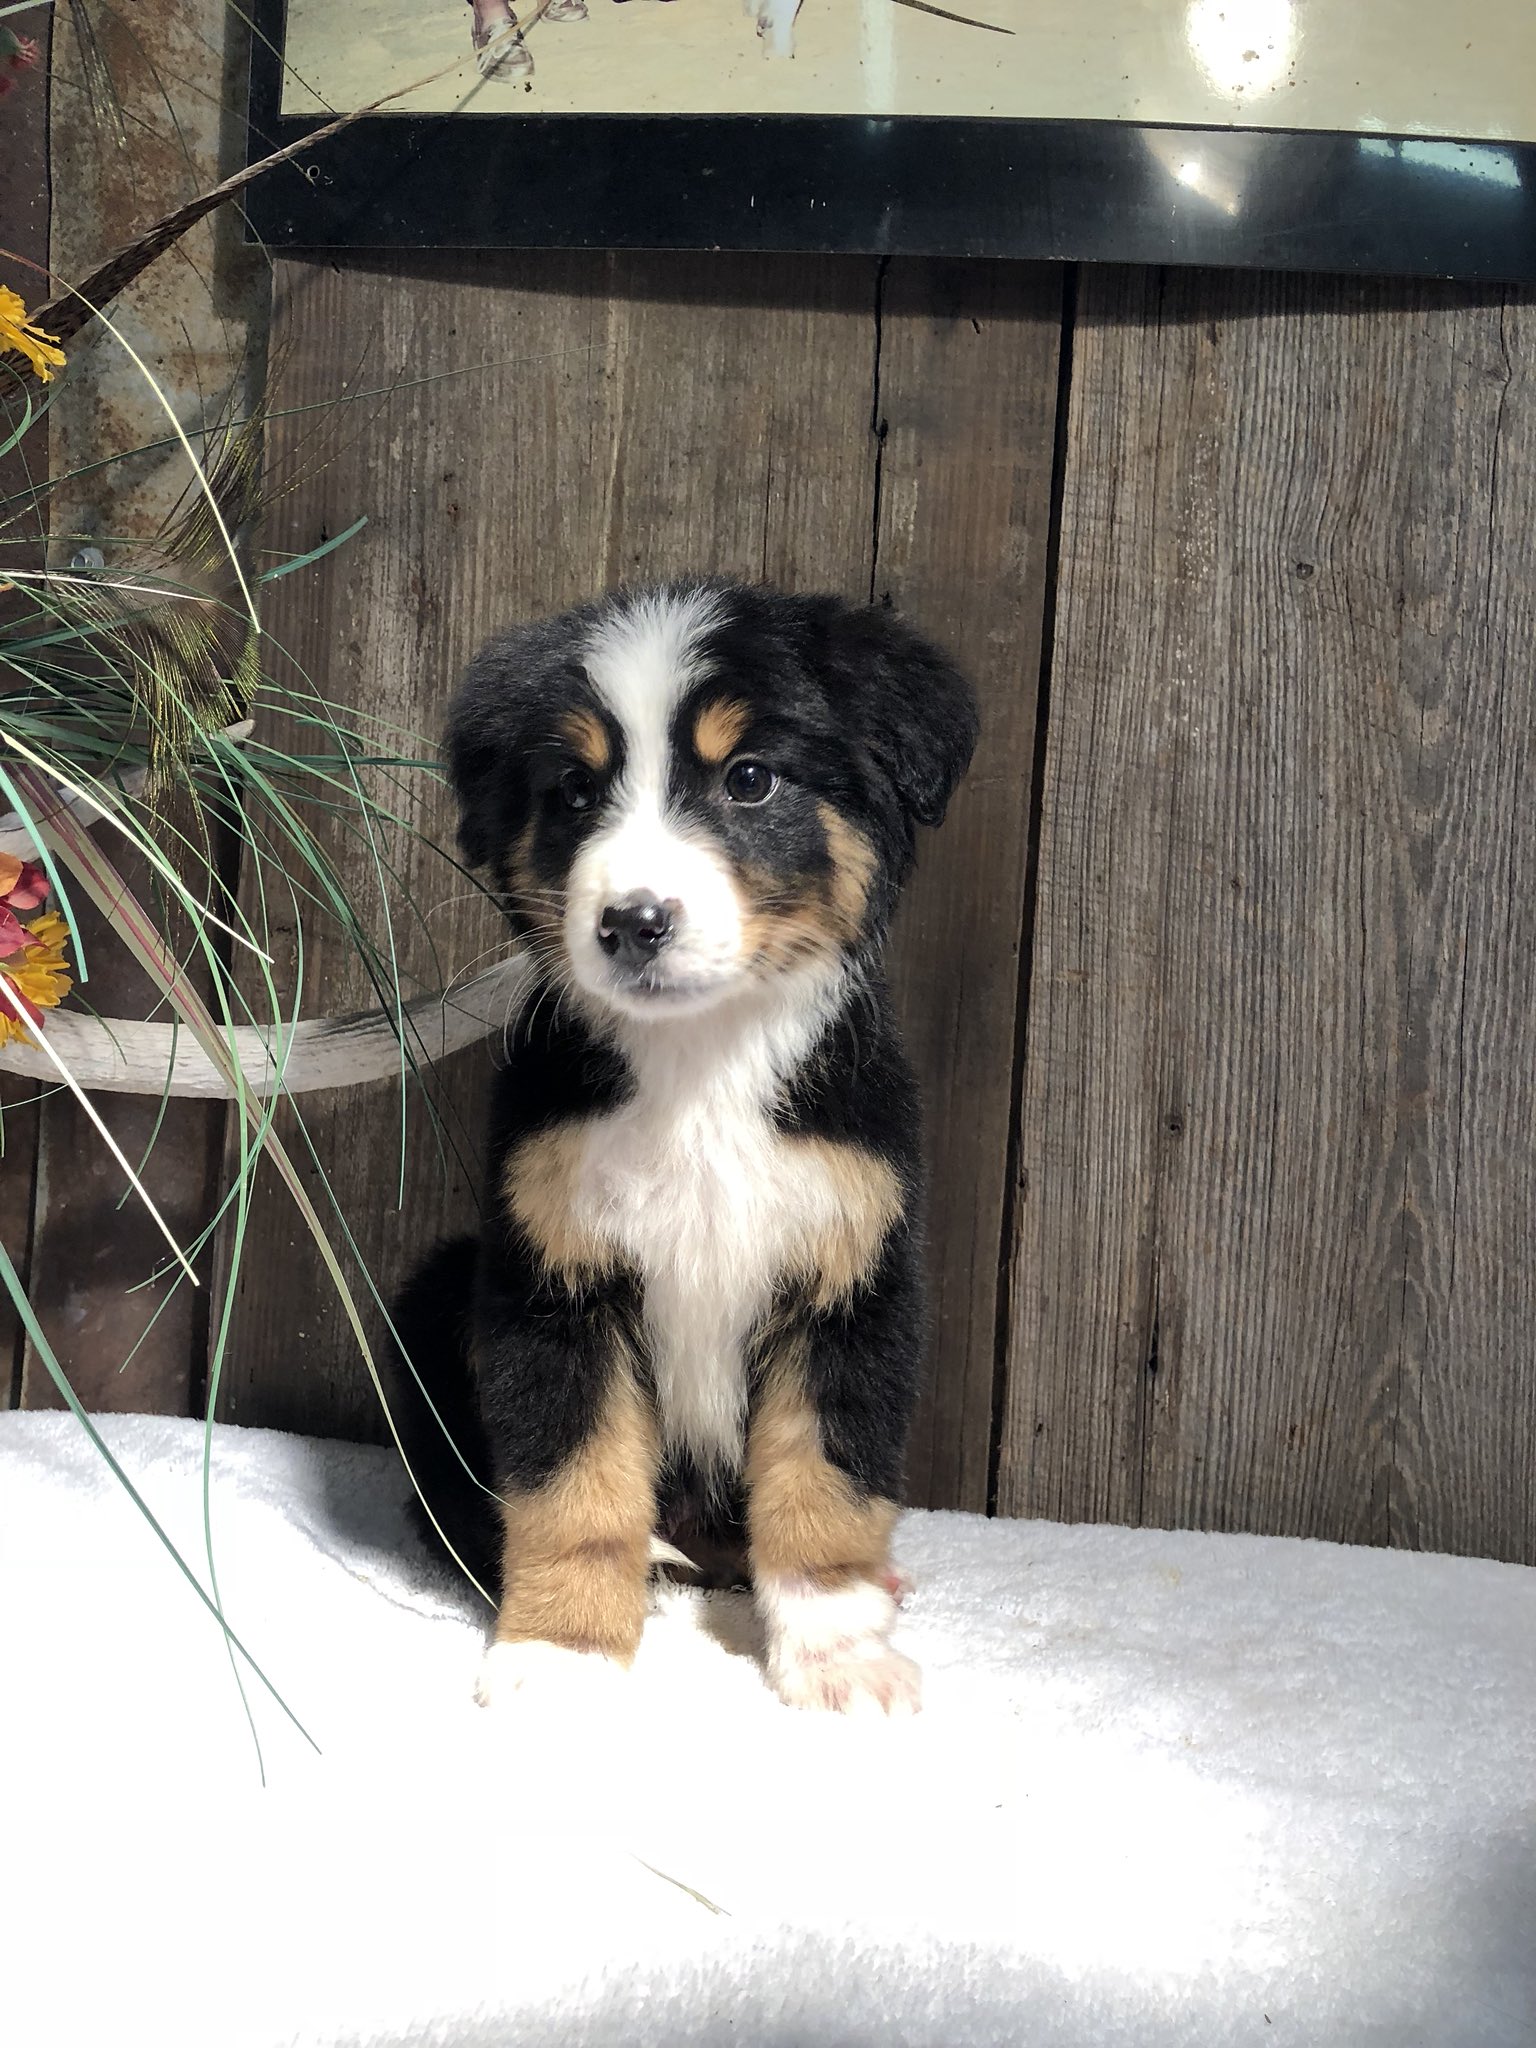 scott gallagher on Twitter: "I have 5 puppies for sale! Just in time for  Christmas 🎄 🐶 four boys and one girl! Border collie and Bernese mountain  dog mix. DM for more